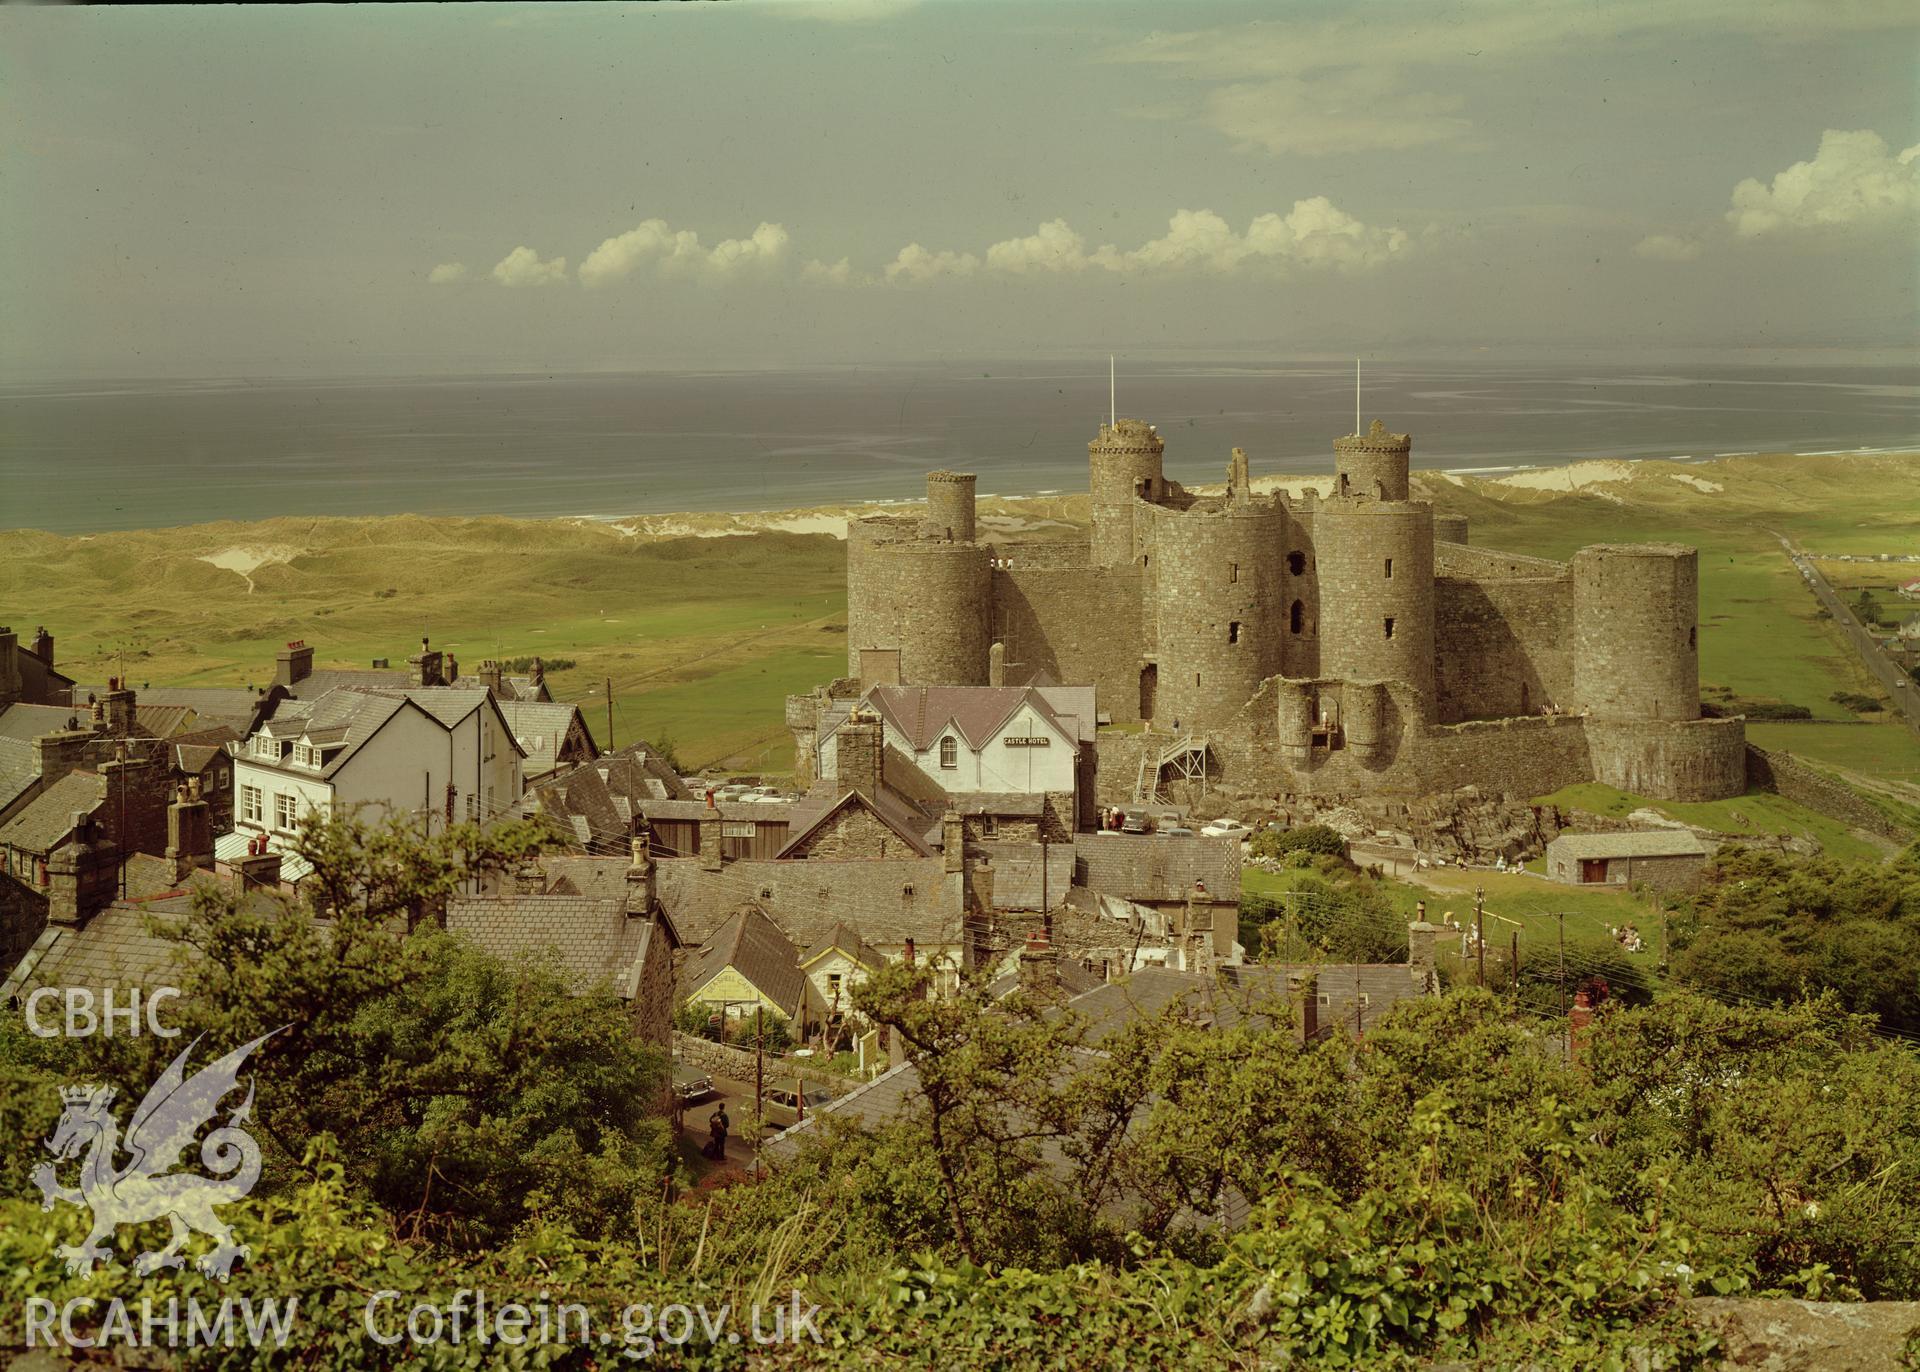 Digital copy of a negative showing view of Harlech Castle from the east.